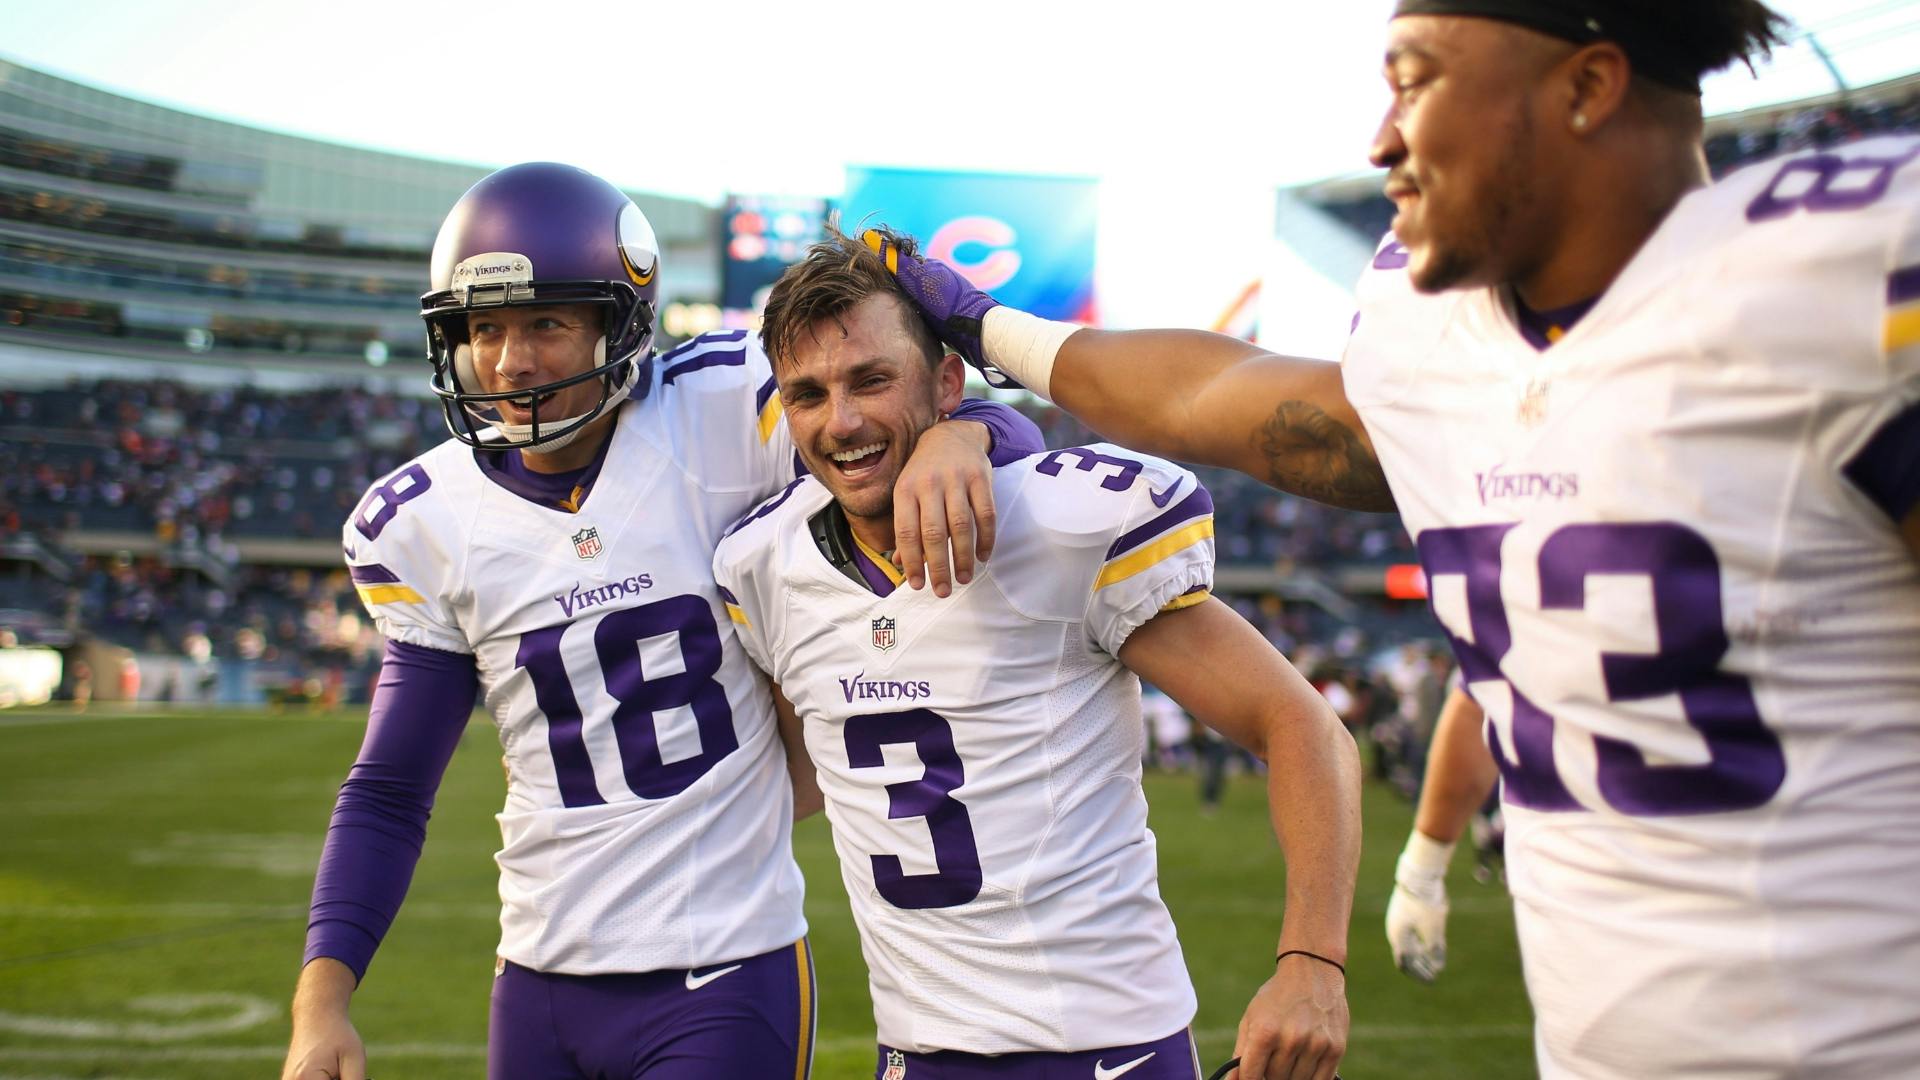 Vikings players Brian Robison, Xavier Rhodes and Blair Walsh feel like the team came together for an important road win.